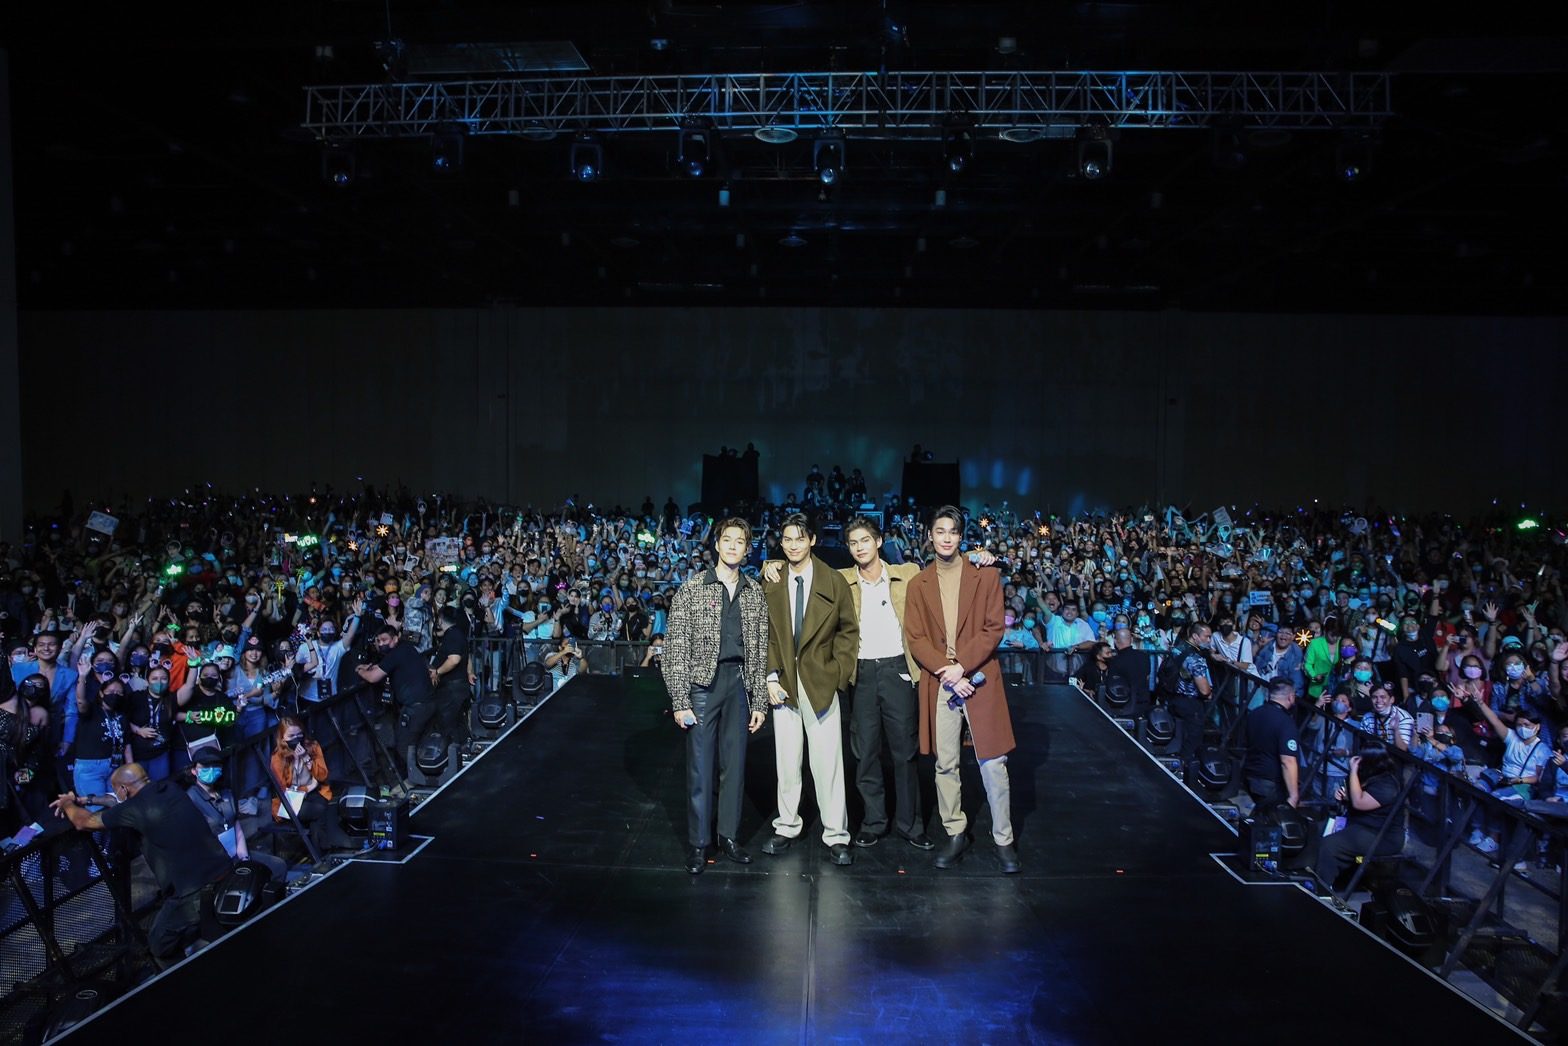 LOOK: 'F4 Thailand' cast hold 'Shooting Star' concert in Manila